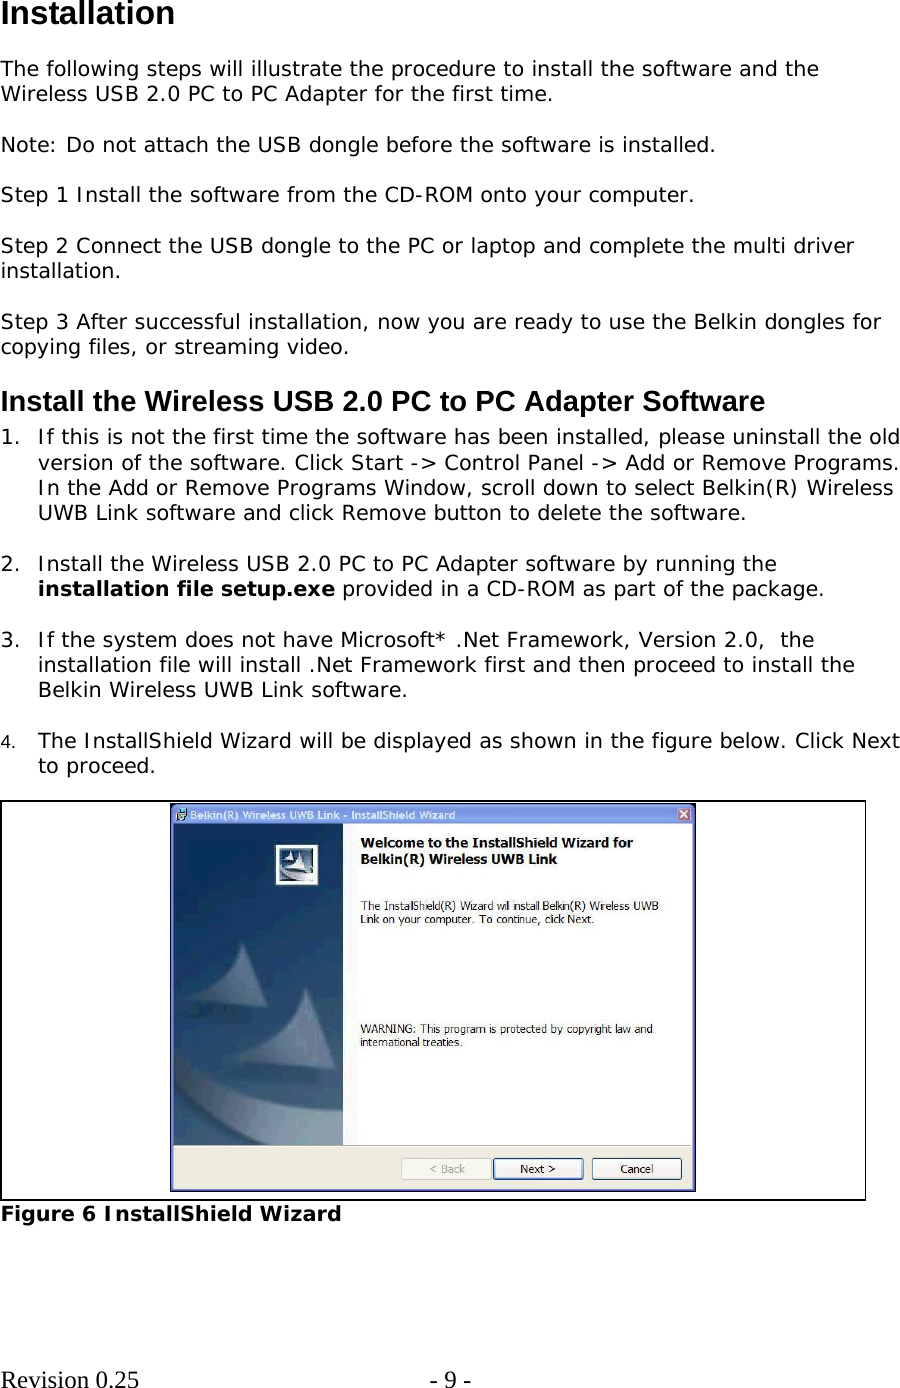        Revision 0.25  - 9 -      Installation  The following steps will illustrate the procedure to install the software and the Wireless USB 2.0 PC to PC Adapter for the first time.  Note: Do not attach the USB dongle before the software is installed.  Step 1 Install the software from the CD-ROM onto your computer.   Step 2 Connect the USB dongle to the PC or laptop and complete the multi driver installation.  Step 3 After successful installation, now you are ready to use the Belkin dongles for copying files, or streaming video. Install the Wireless USB 2.0 PC to PC Adapter Software 1. If this is not the first time the software has been installed, please uninstall the old version of the software. Click Start -&gt; Control Panel -&gt; Add or Remove Programs. In the Add or Remove Programs Window, scroll down to select Belkin(R) Wireless UWB Link software and click Remove button to delete the software.  2. Install the Wireless USB 2.0 PC to PC Adapter software by running the installation file setup.exe provided in a CD-ROM as part of the package.   3. If the system does not have Microsoft* .Net Framework, Version 2.0,  the installation file will install .Net Framework first and then proceed to install the Belkin Wireless UWB Link software.  4.  The InstallShield Wizard will be displayed as shown in the figure below. Click Next to proceed.   Figure 6 InstallShield Wizard   